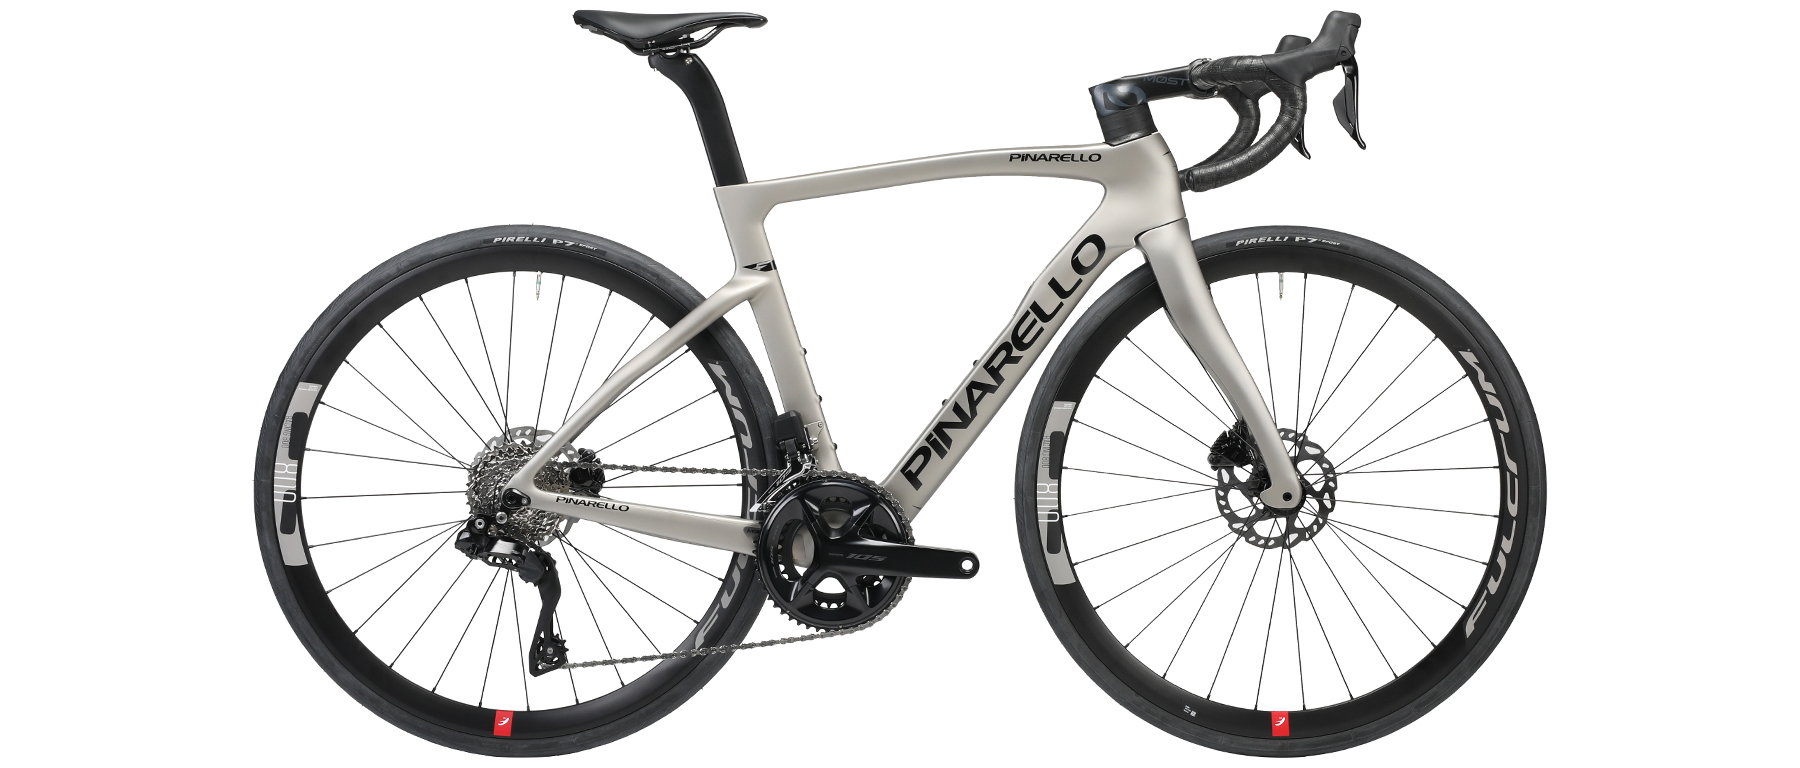 Pinarello F5 105 Di2 R7170 Bicycle (with Alloy Wheelset)